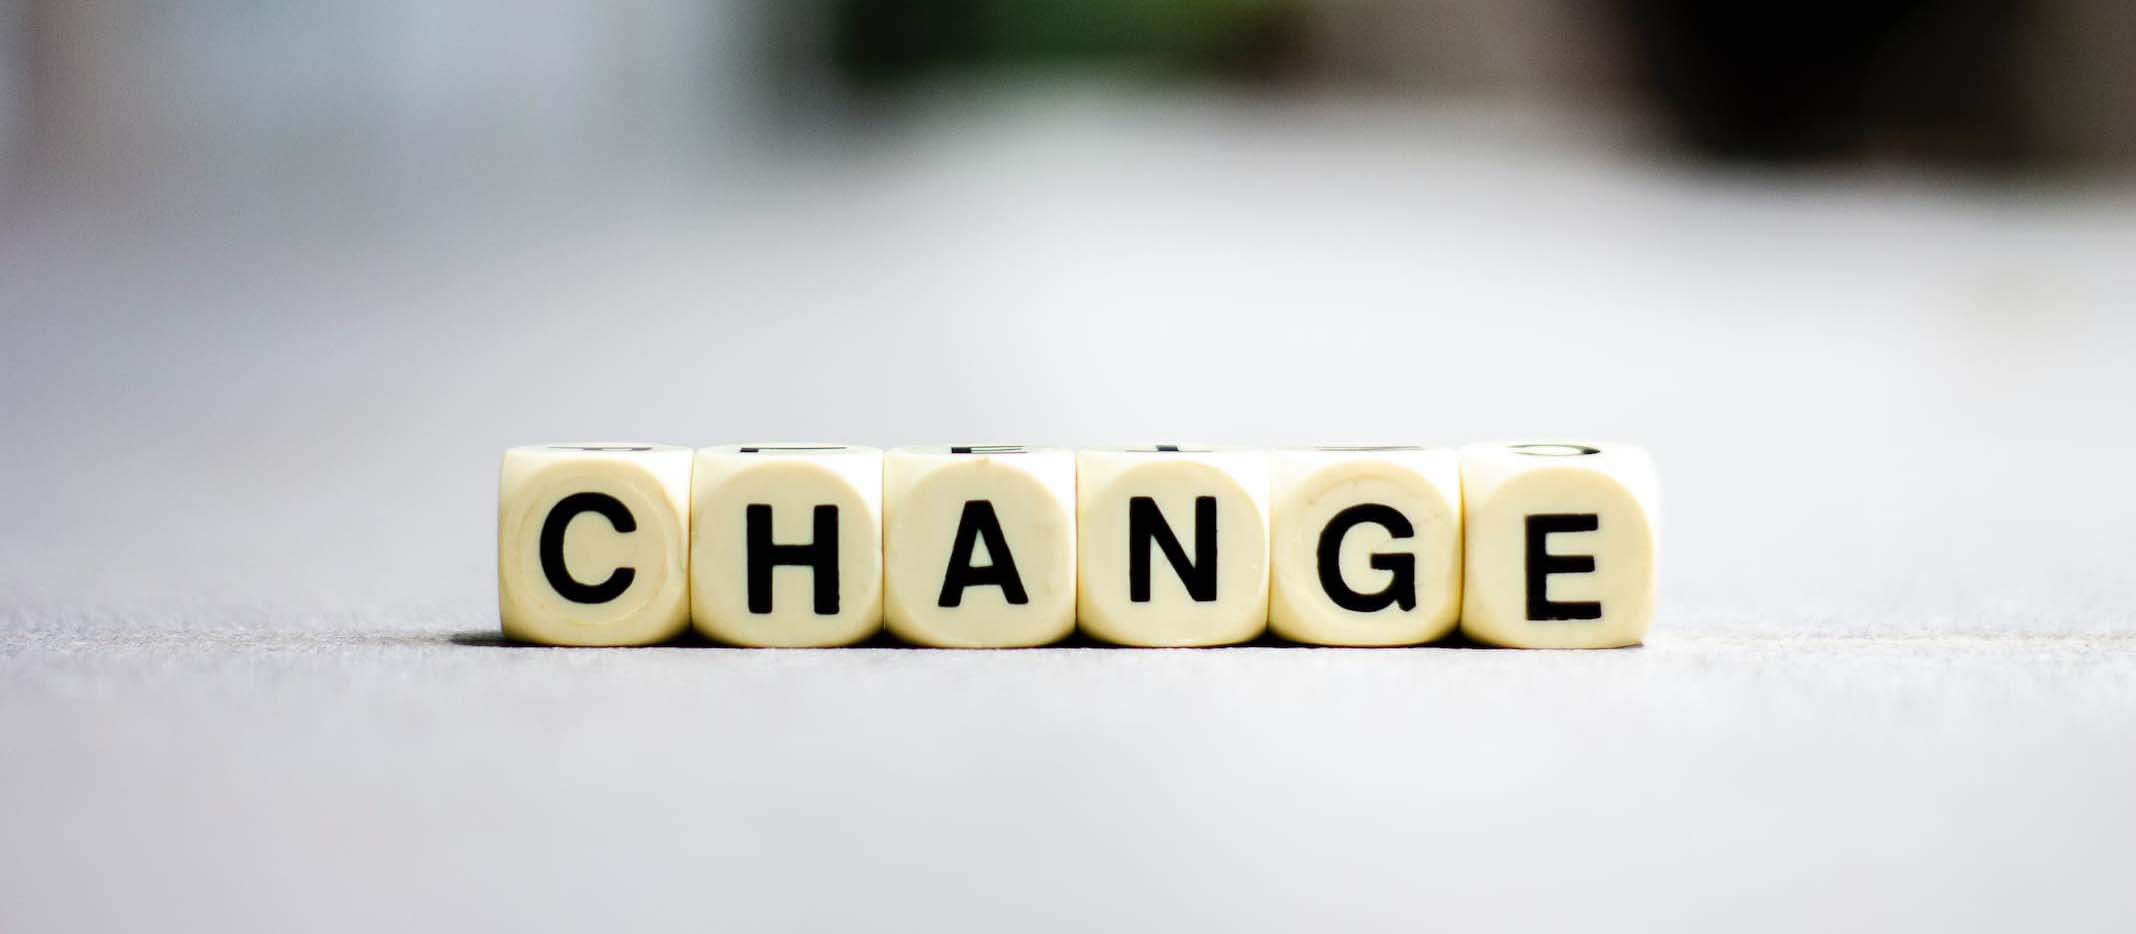 The word 'change' spelt out with dice with letters on.